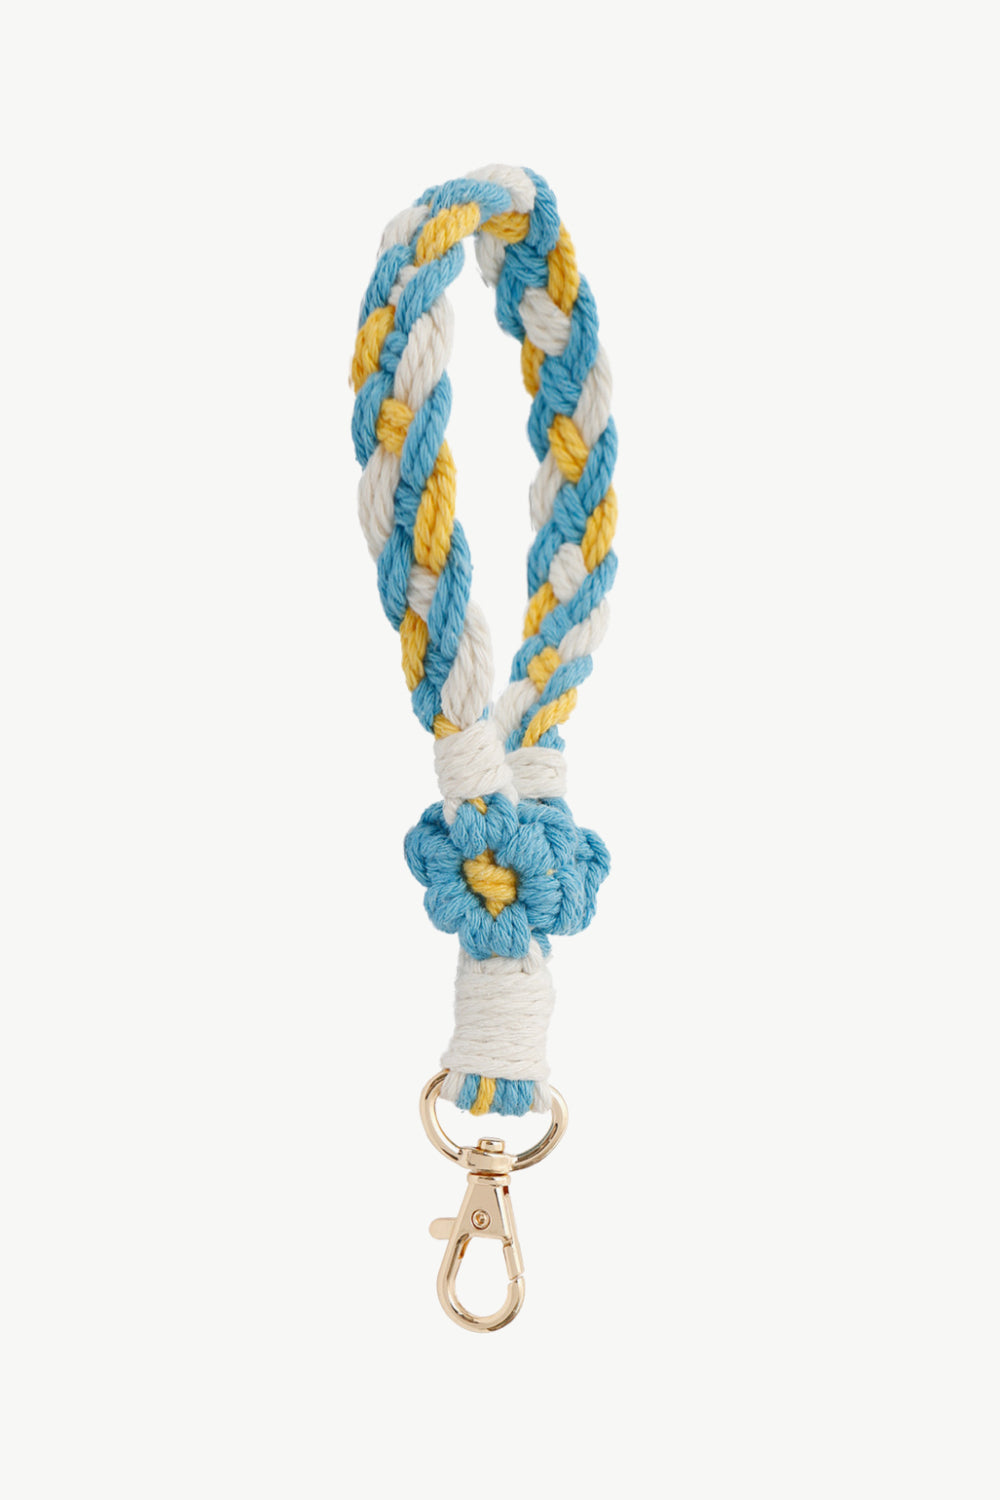 Trendsi Cupid Beauty Supplies Sky Blue / One Size Keychains Floral Braided Wristlet Key Chain